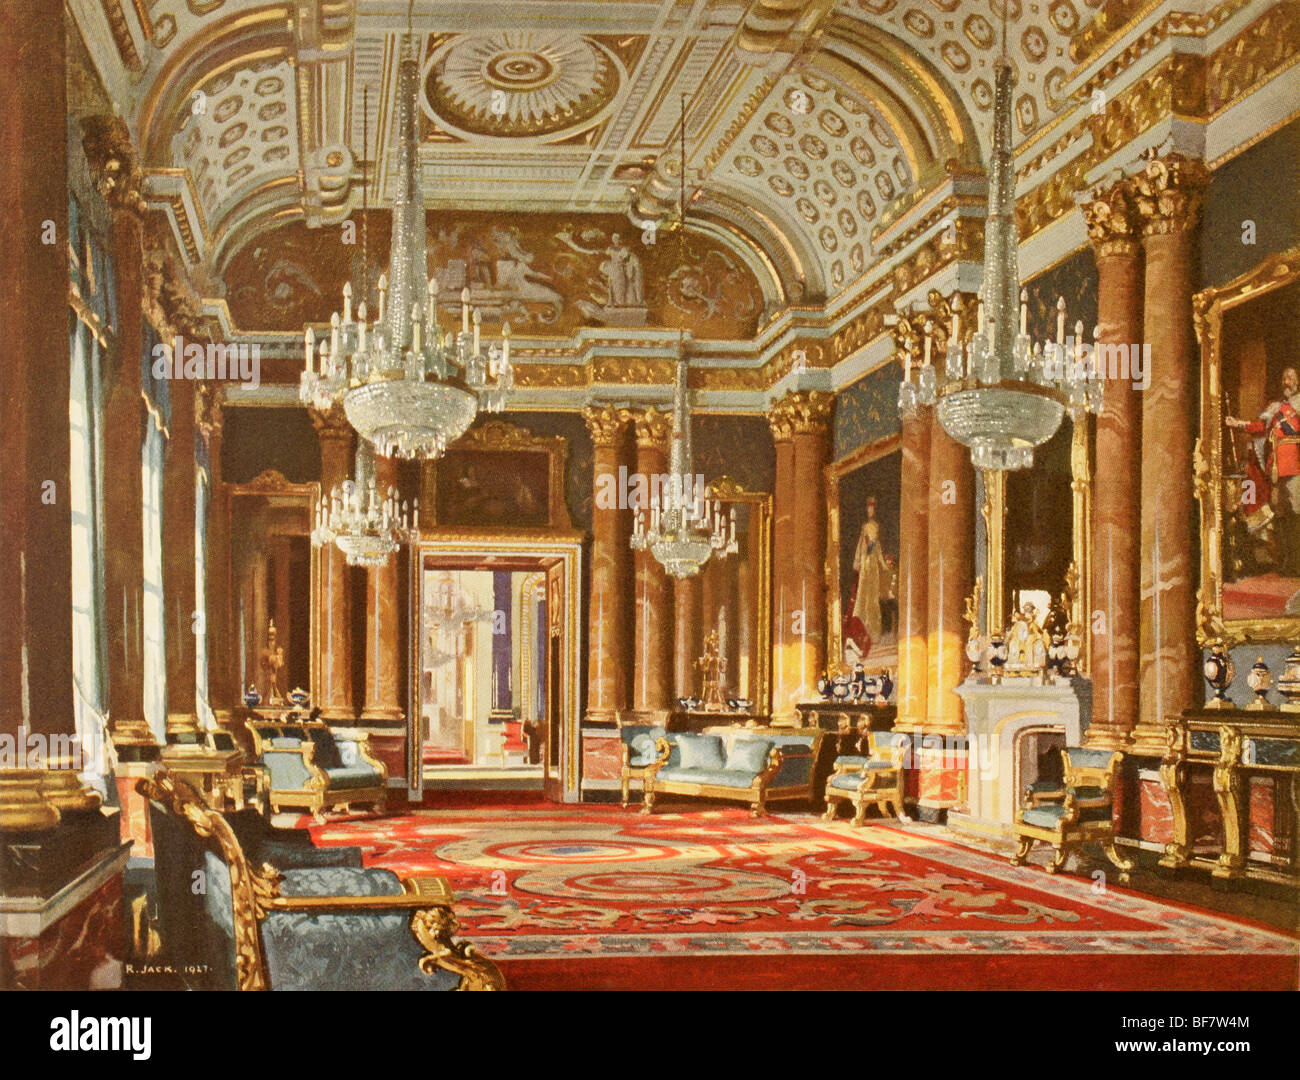 The Blue Drawing Room, formerly the Ballroom, in Buckingham Palace, London, England. Stock Photo